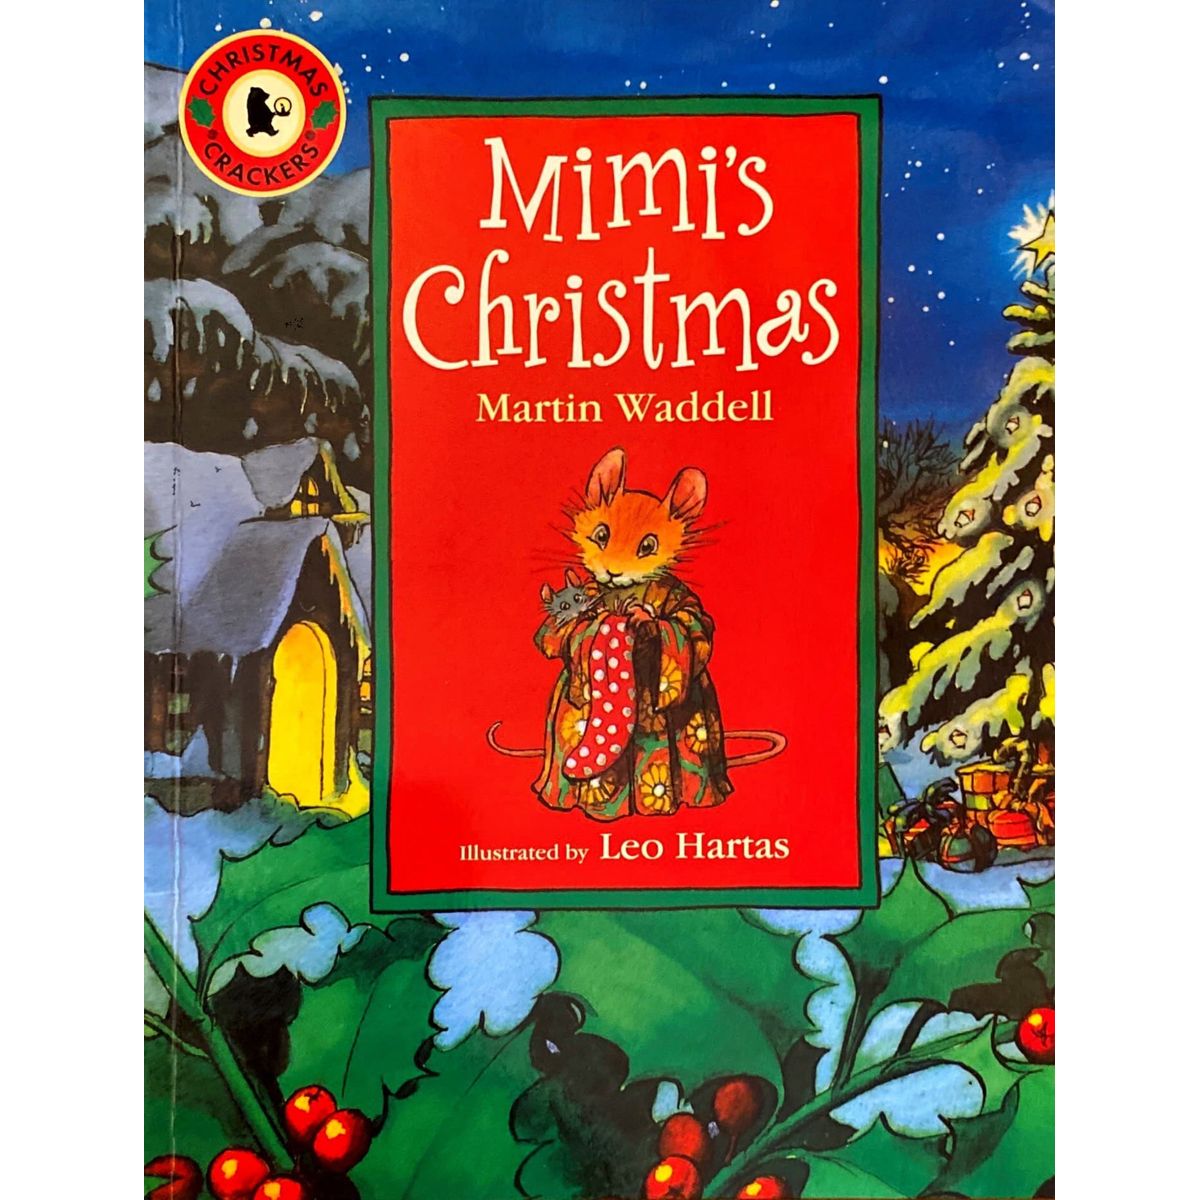 ISBN: 9780744572131 / 0744572134 - Mimi's Christmas by Martin Waddell, illustrated by Leo Hartas [1999]